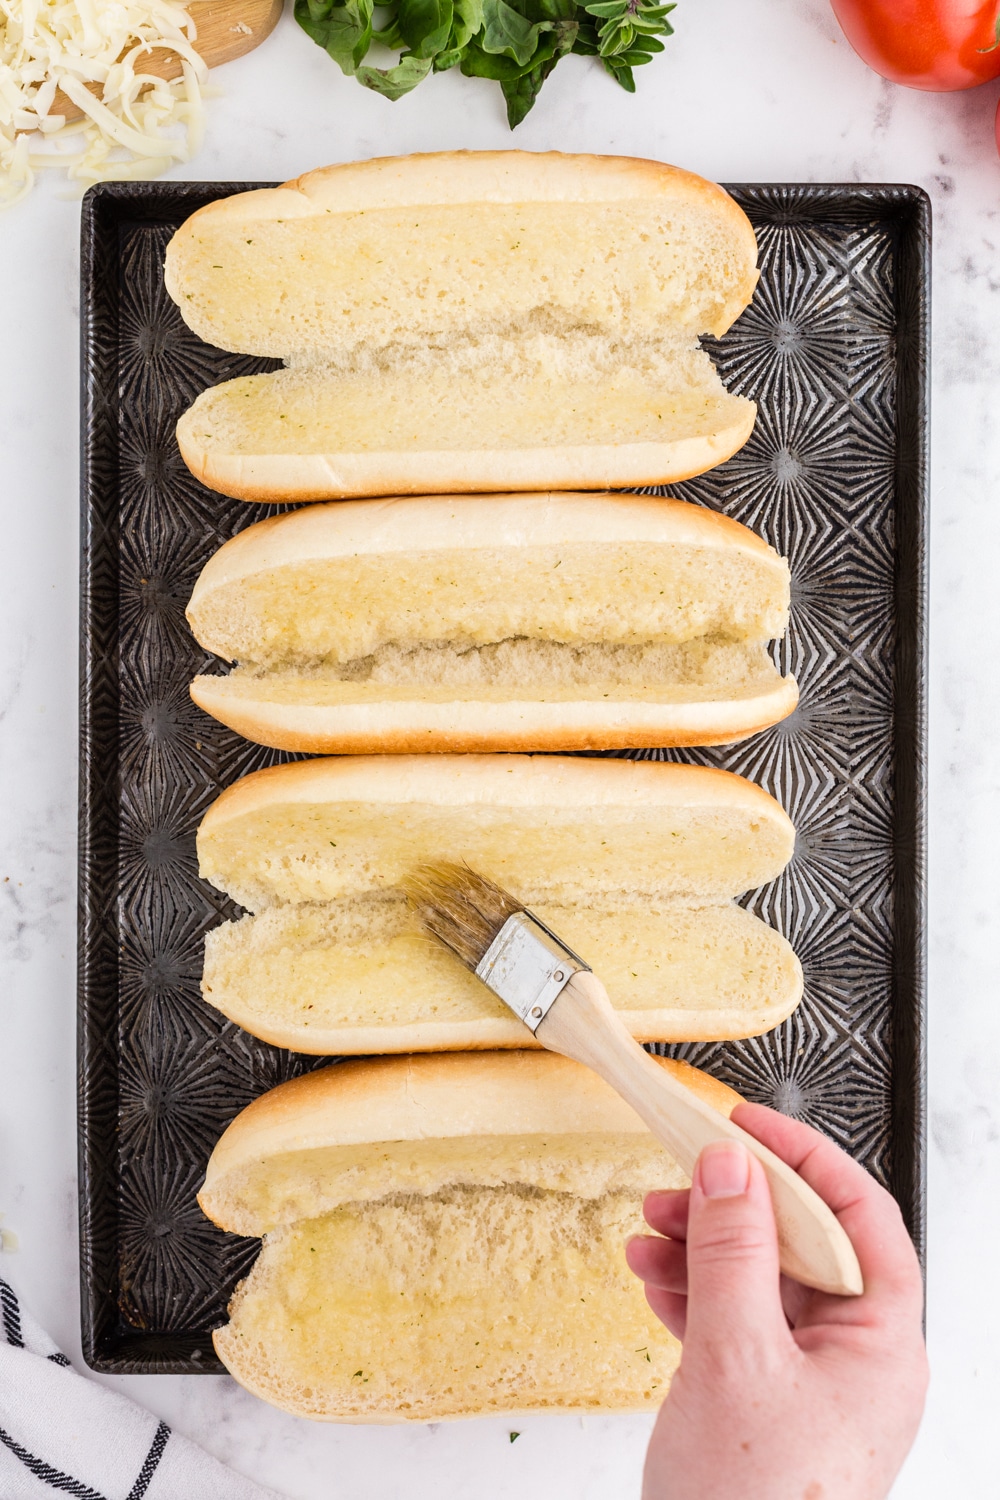 Sandwich buns on cookie sheet being brushed with melted butter.